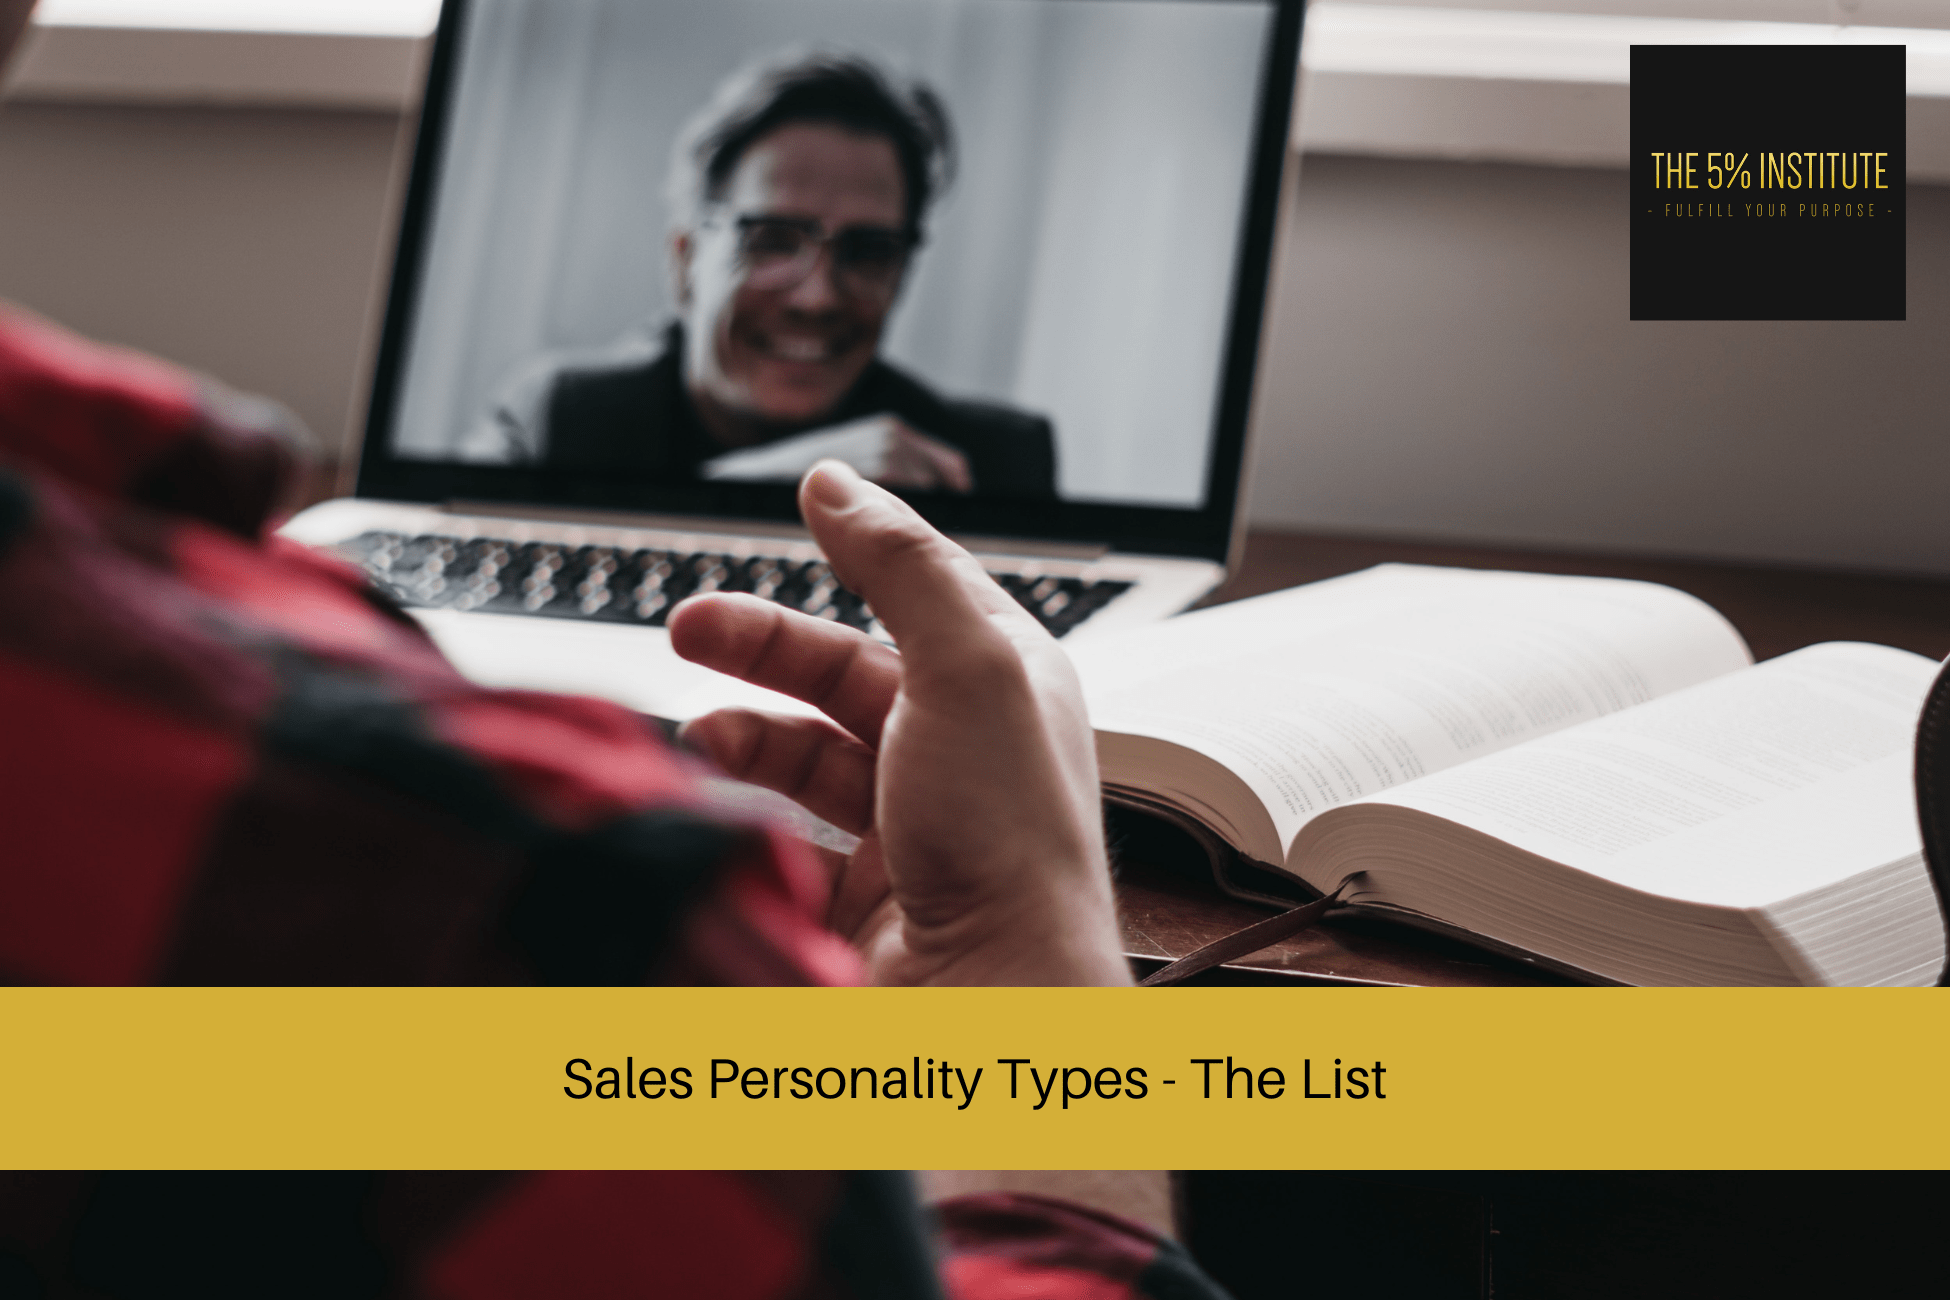 Sales Personality Types - The List